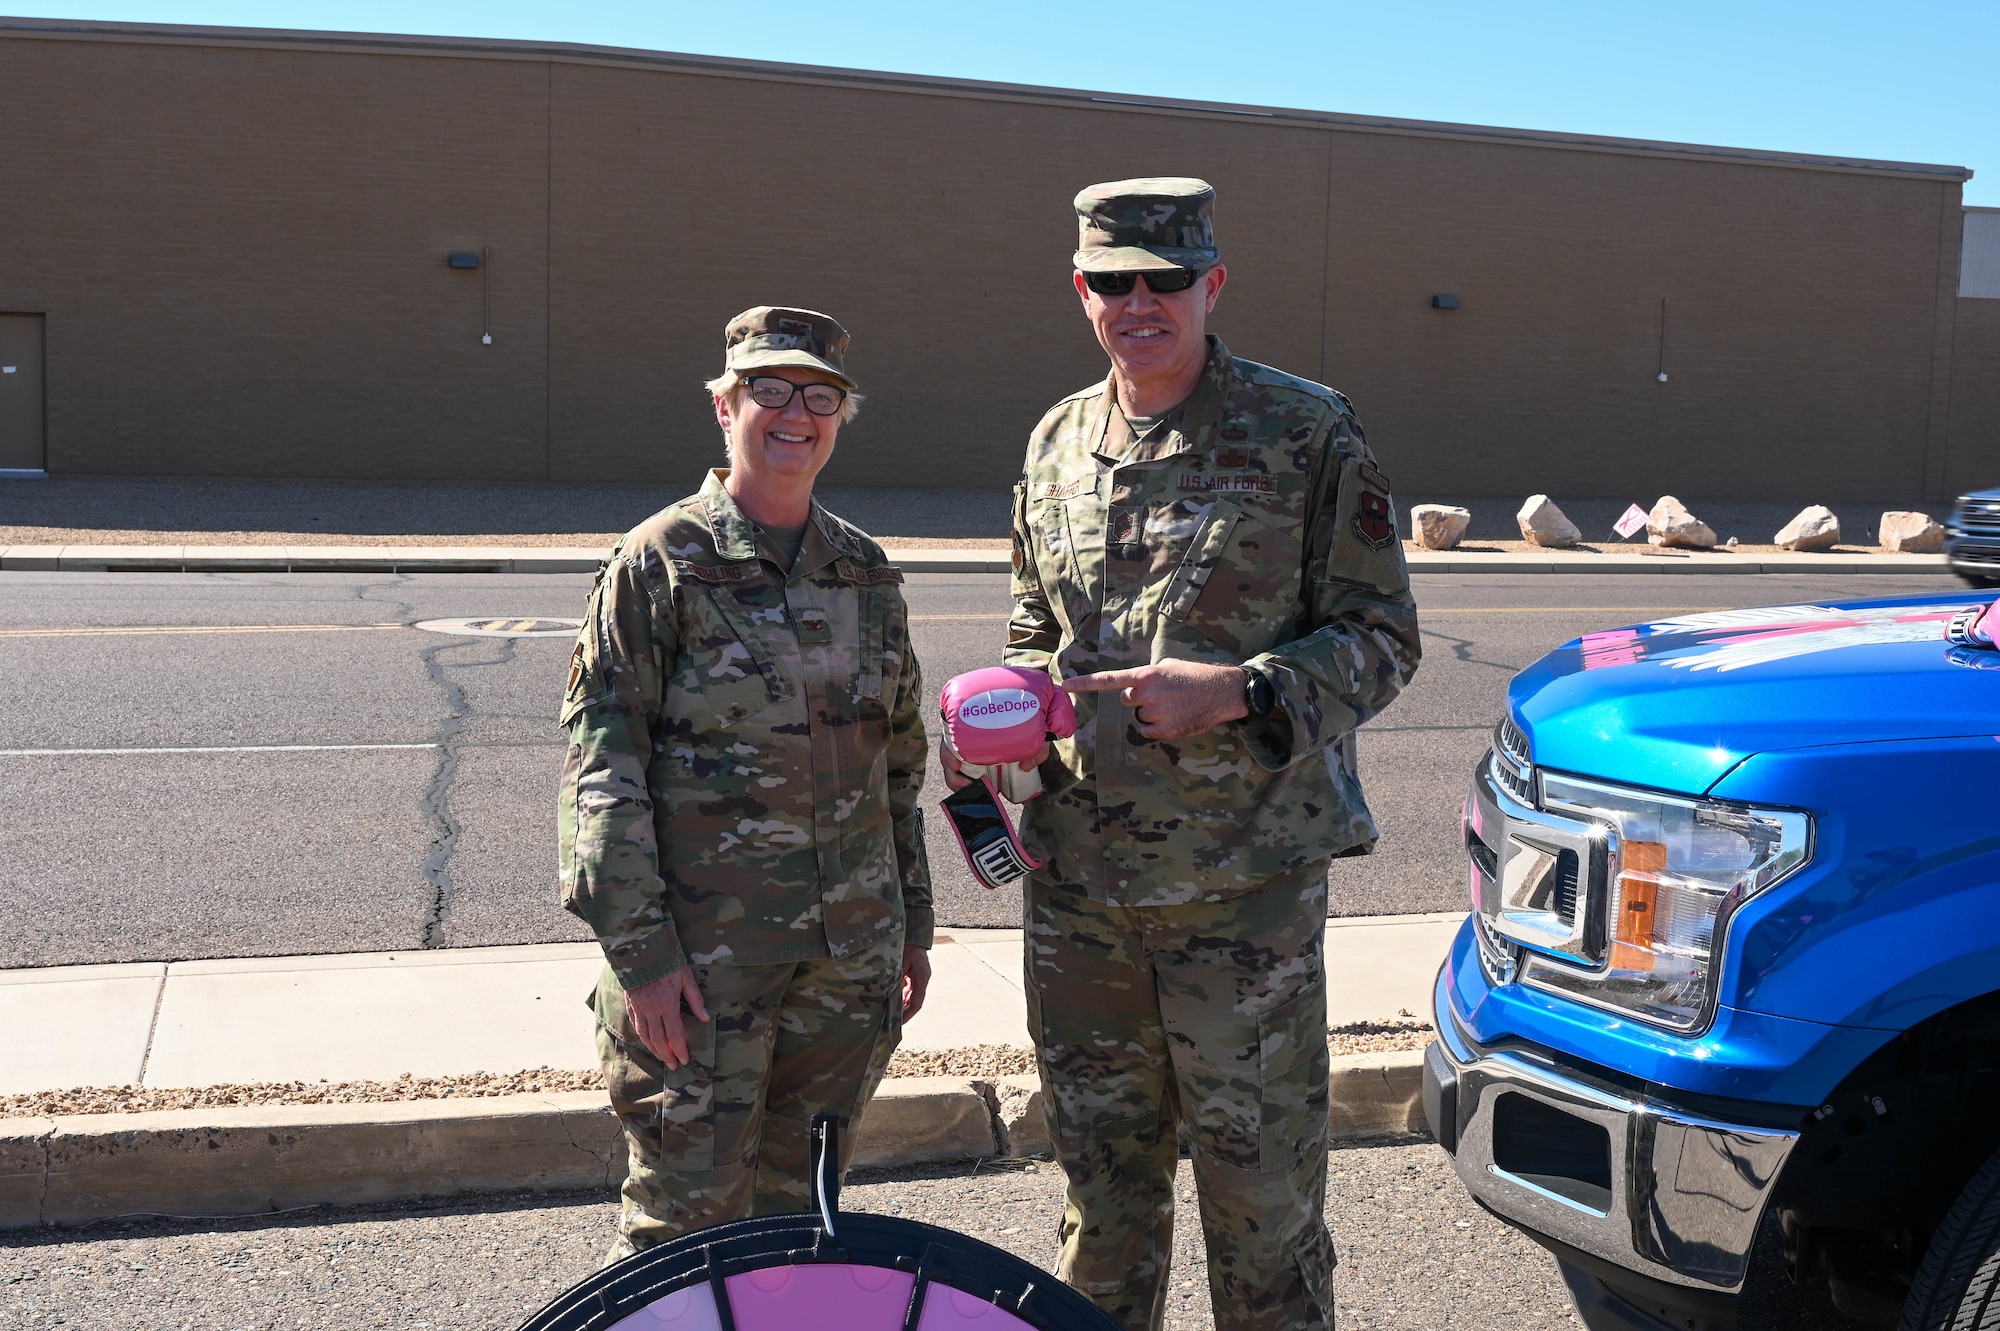 U.S. Air Force Col. Colleen Frohling, 56th Medical Group chief nurse executive, and Chief Master Sgt. Jason Shaffer, 56th Fighter Wing command chief, celebrate breast cancer awareness month Oct. 5, 2022, at Luke Air Force Base, Arizona.